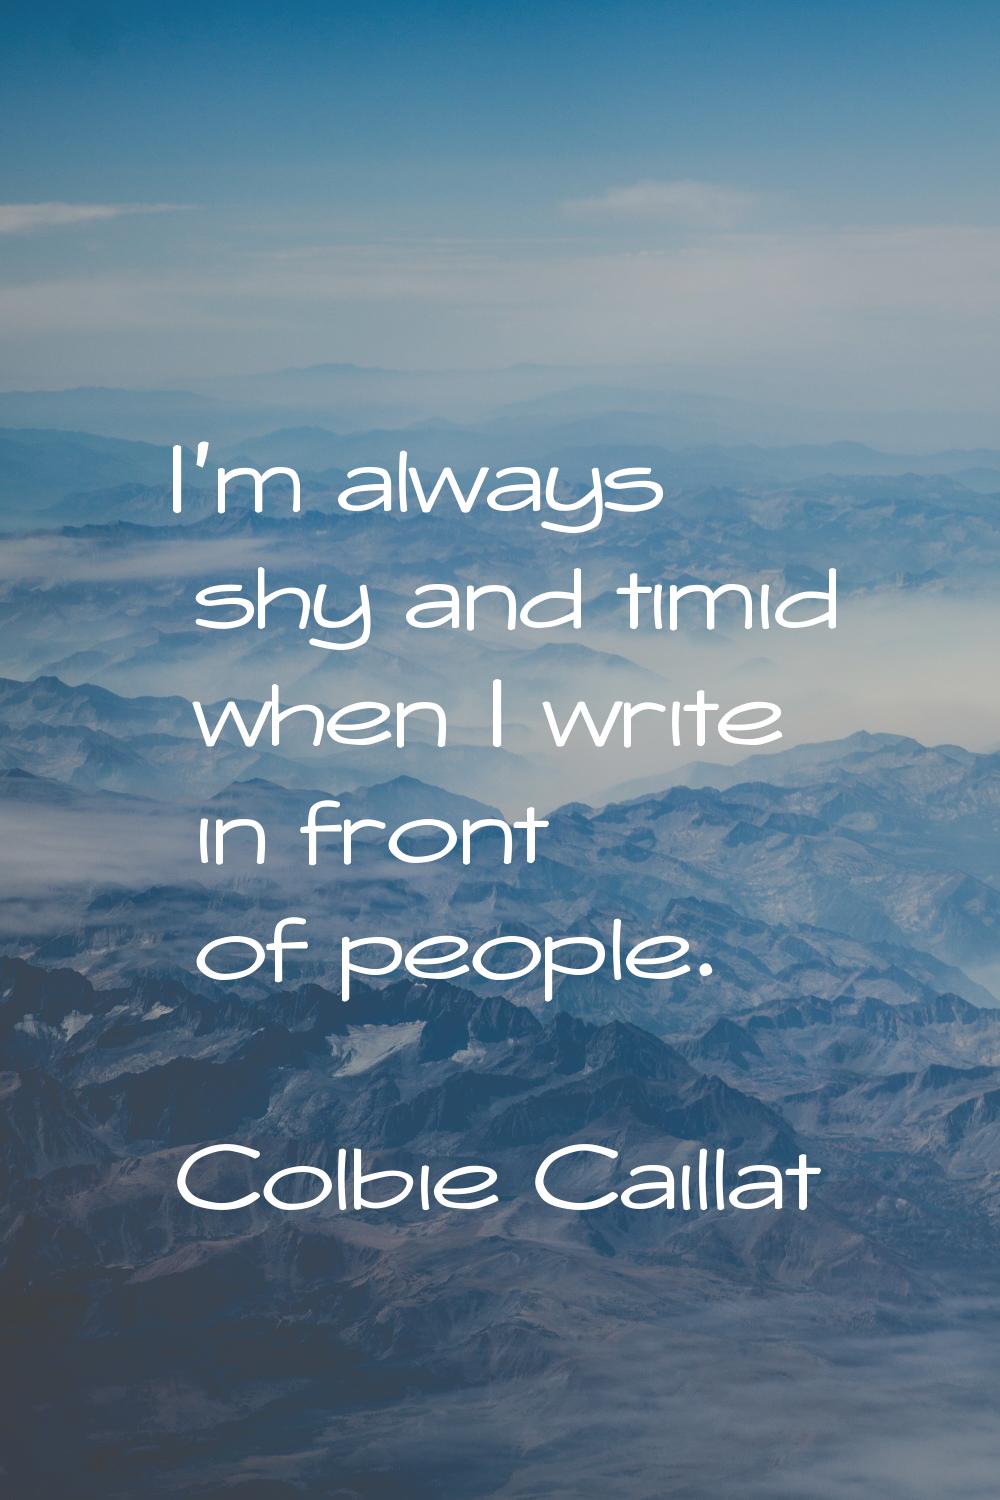 I'm always shy and timid when I write in front of people.